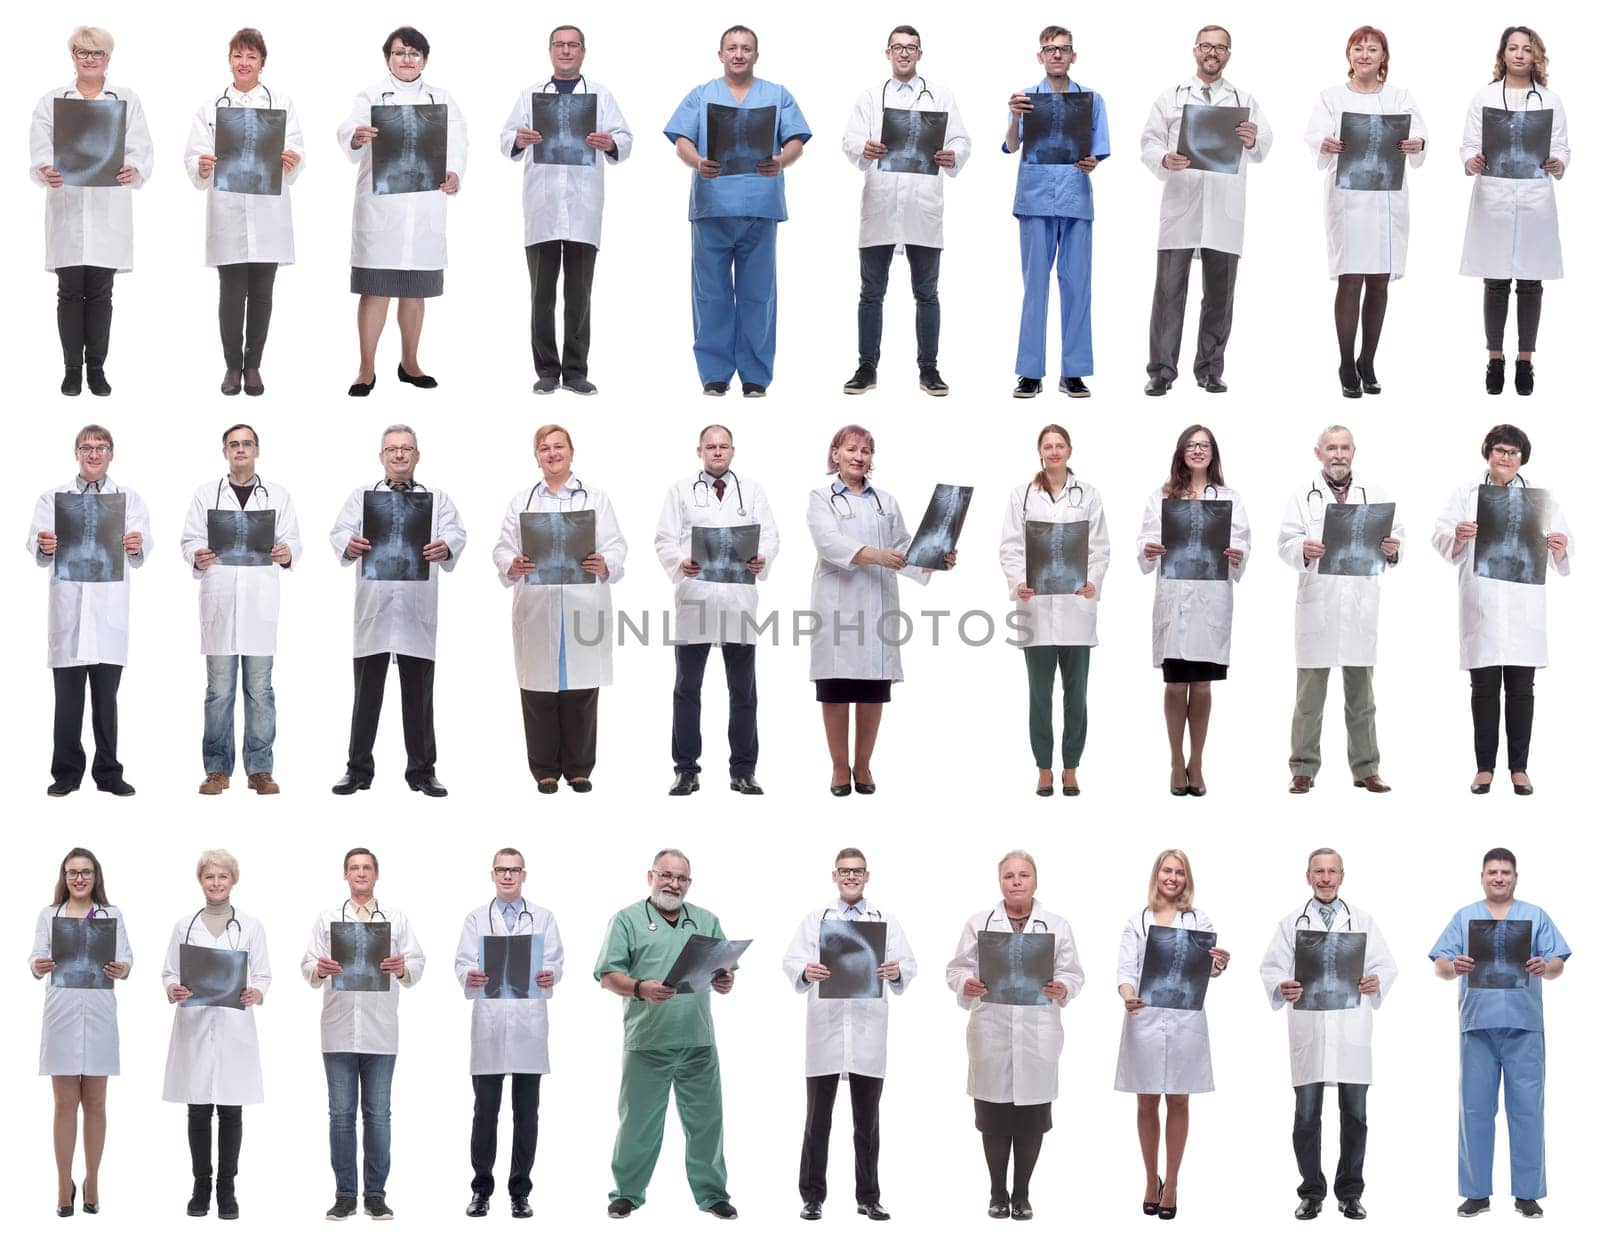 group of doctors holding x-ray isolated on white by asdf